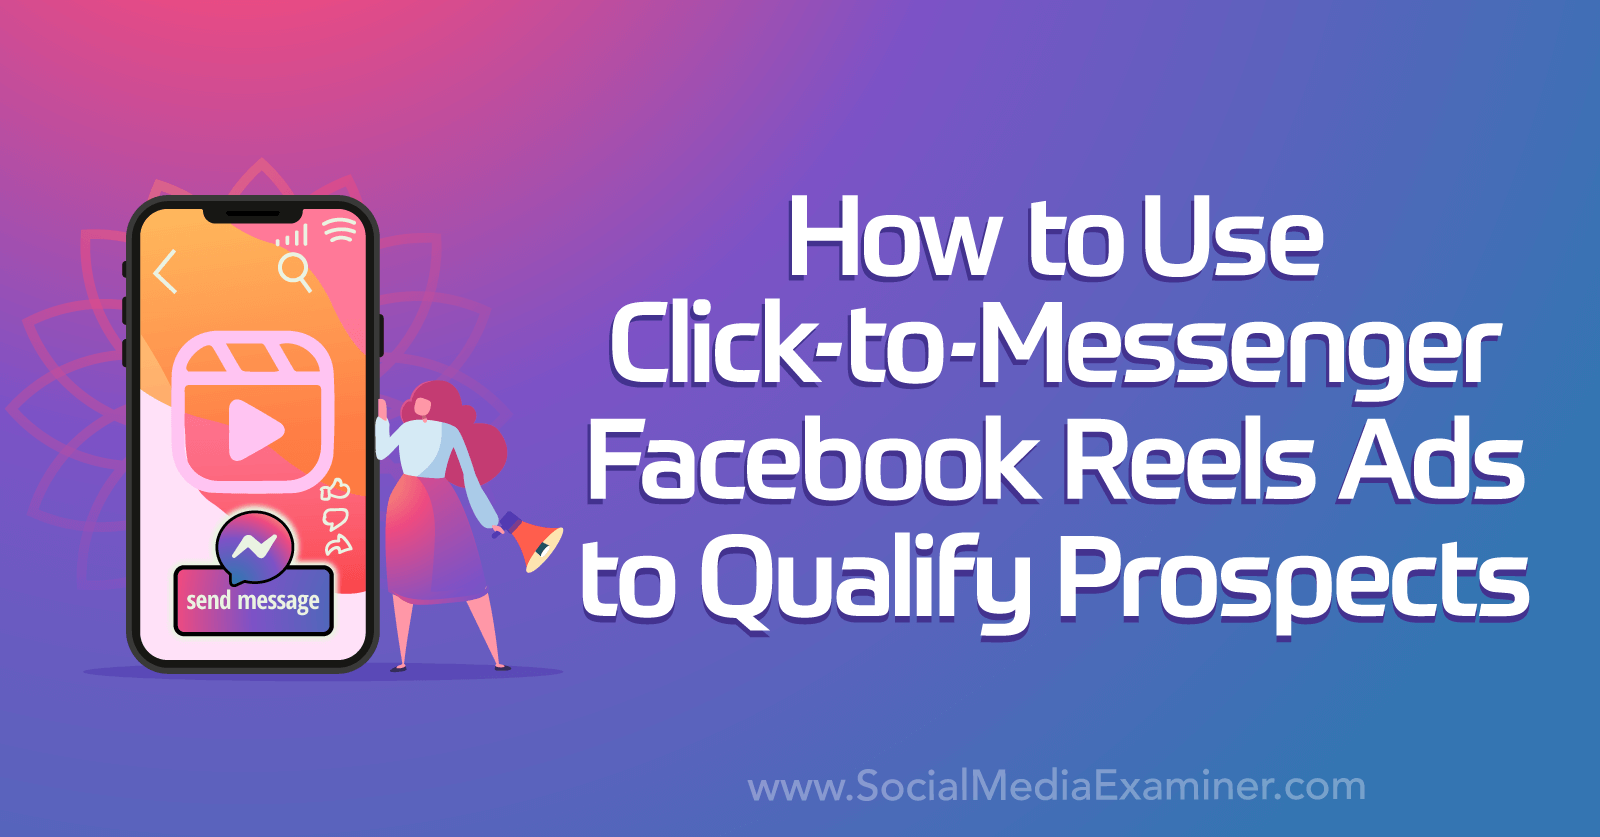 How to Use Click-to-Messenger Facebook Reels Ads to Qualify Prospects by Social Media Examiner